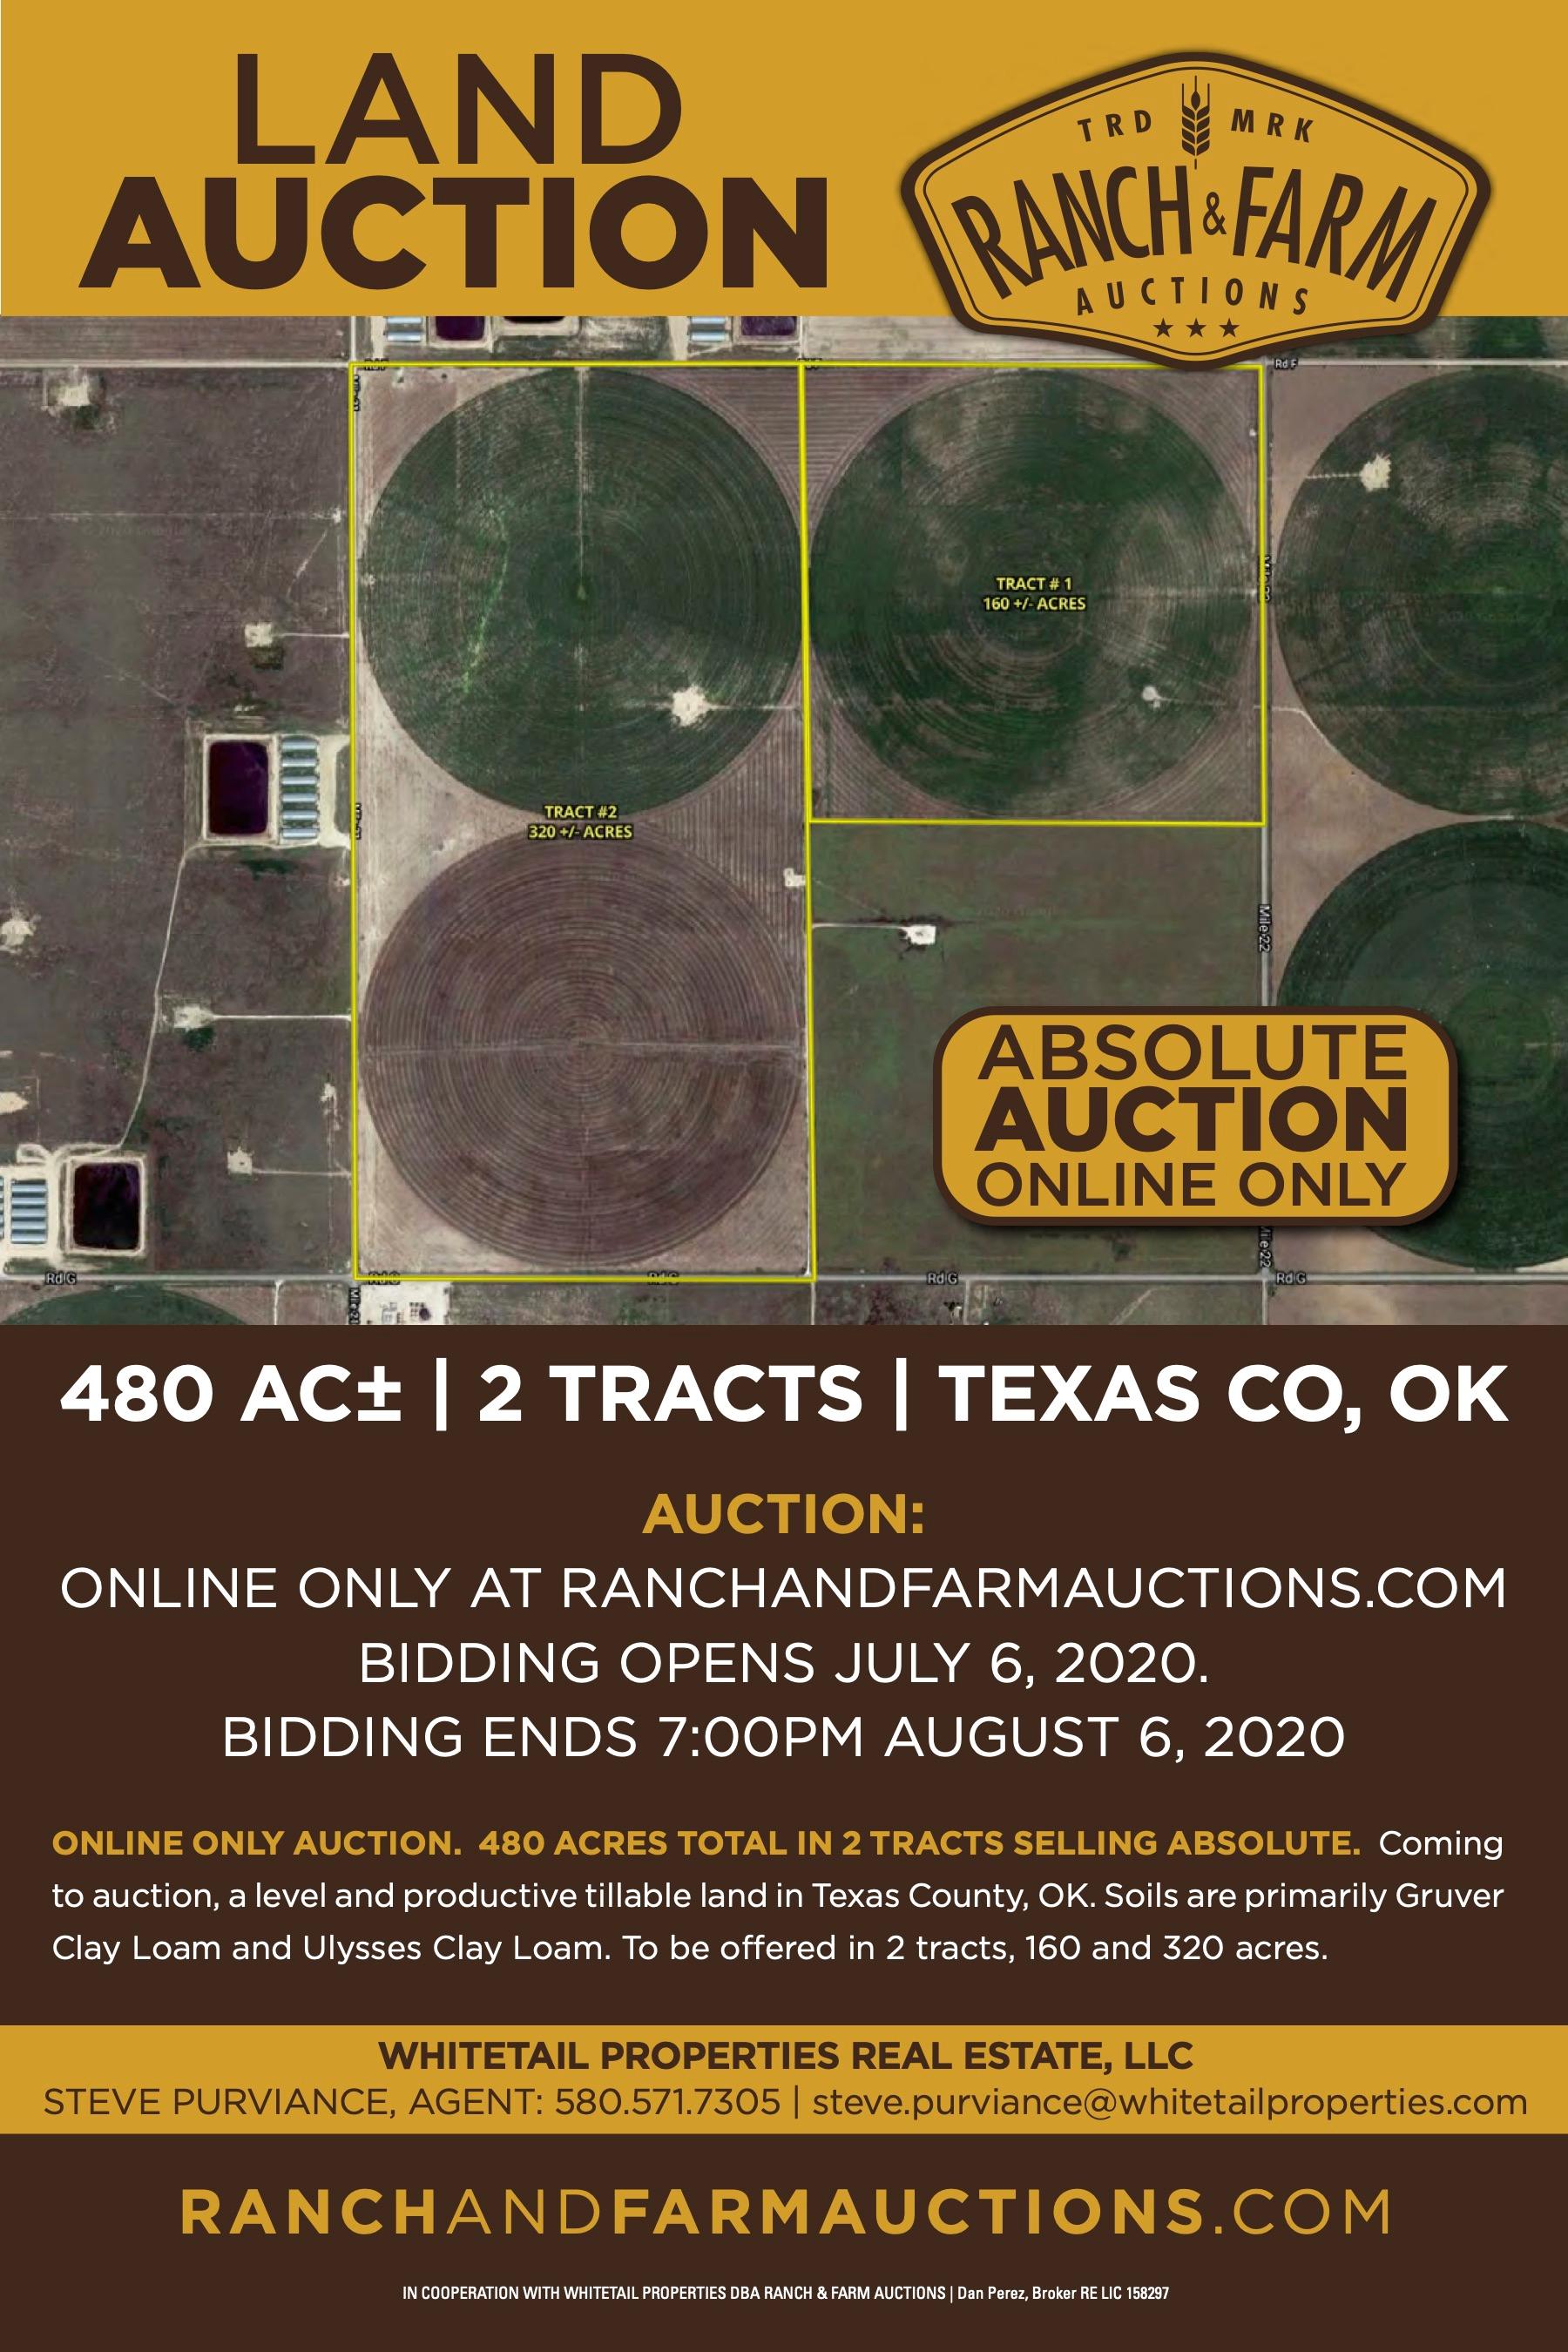 160 Acres of Well-Managed Farmland With Irrigation Potential In Texas County OK